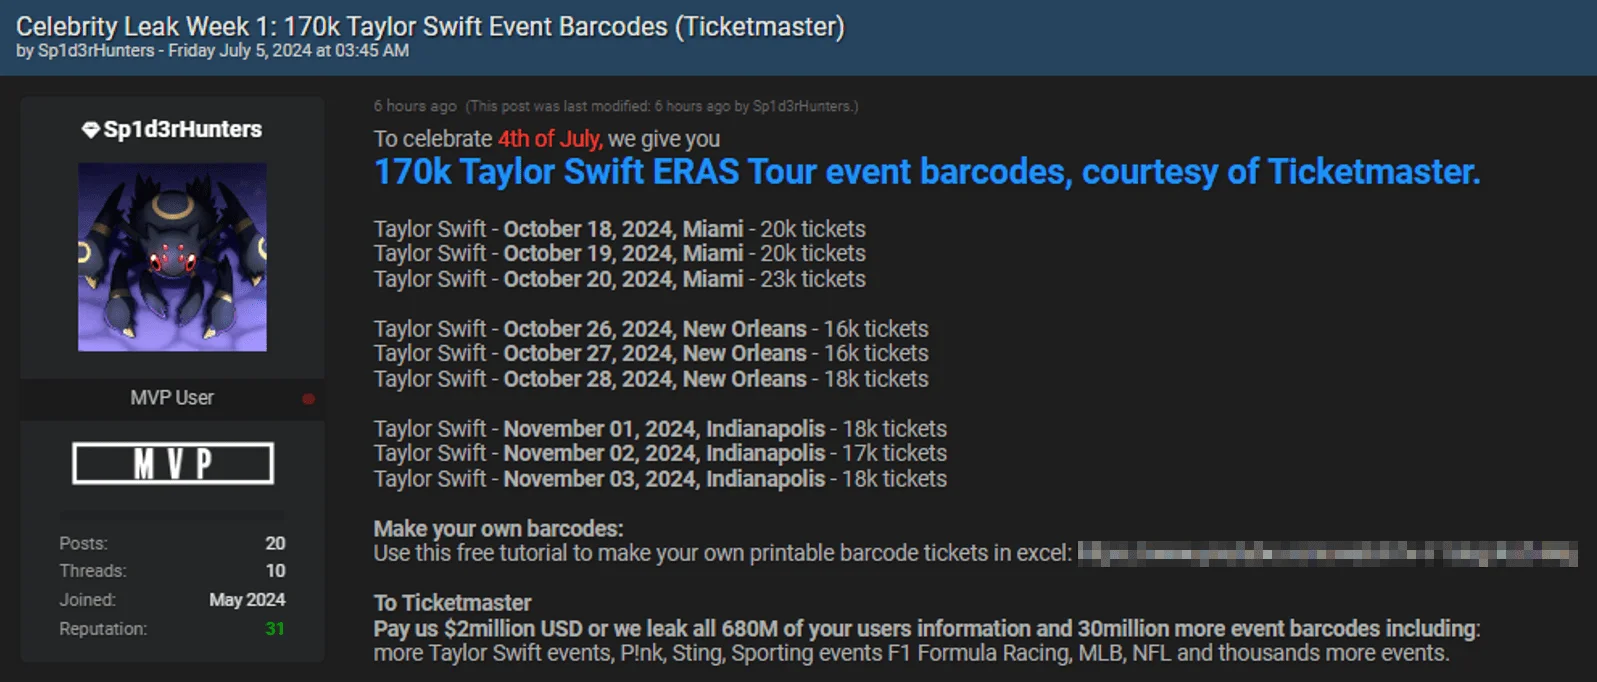 The leak post by ‘Sp1d3rHunters’ includes 170K Taylor Swift event barcodes, Ticketmaster, Snowflake breach